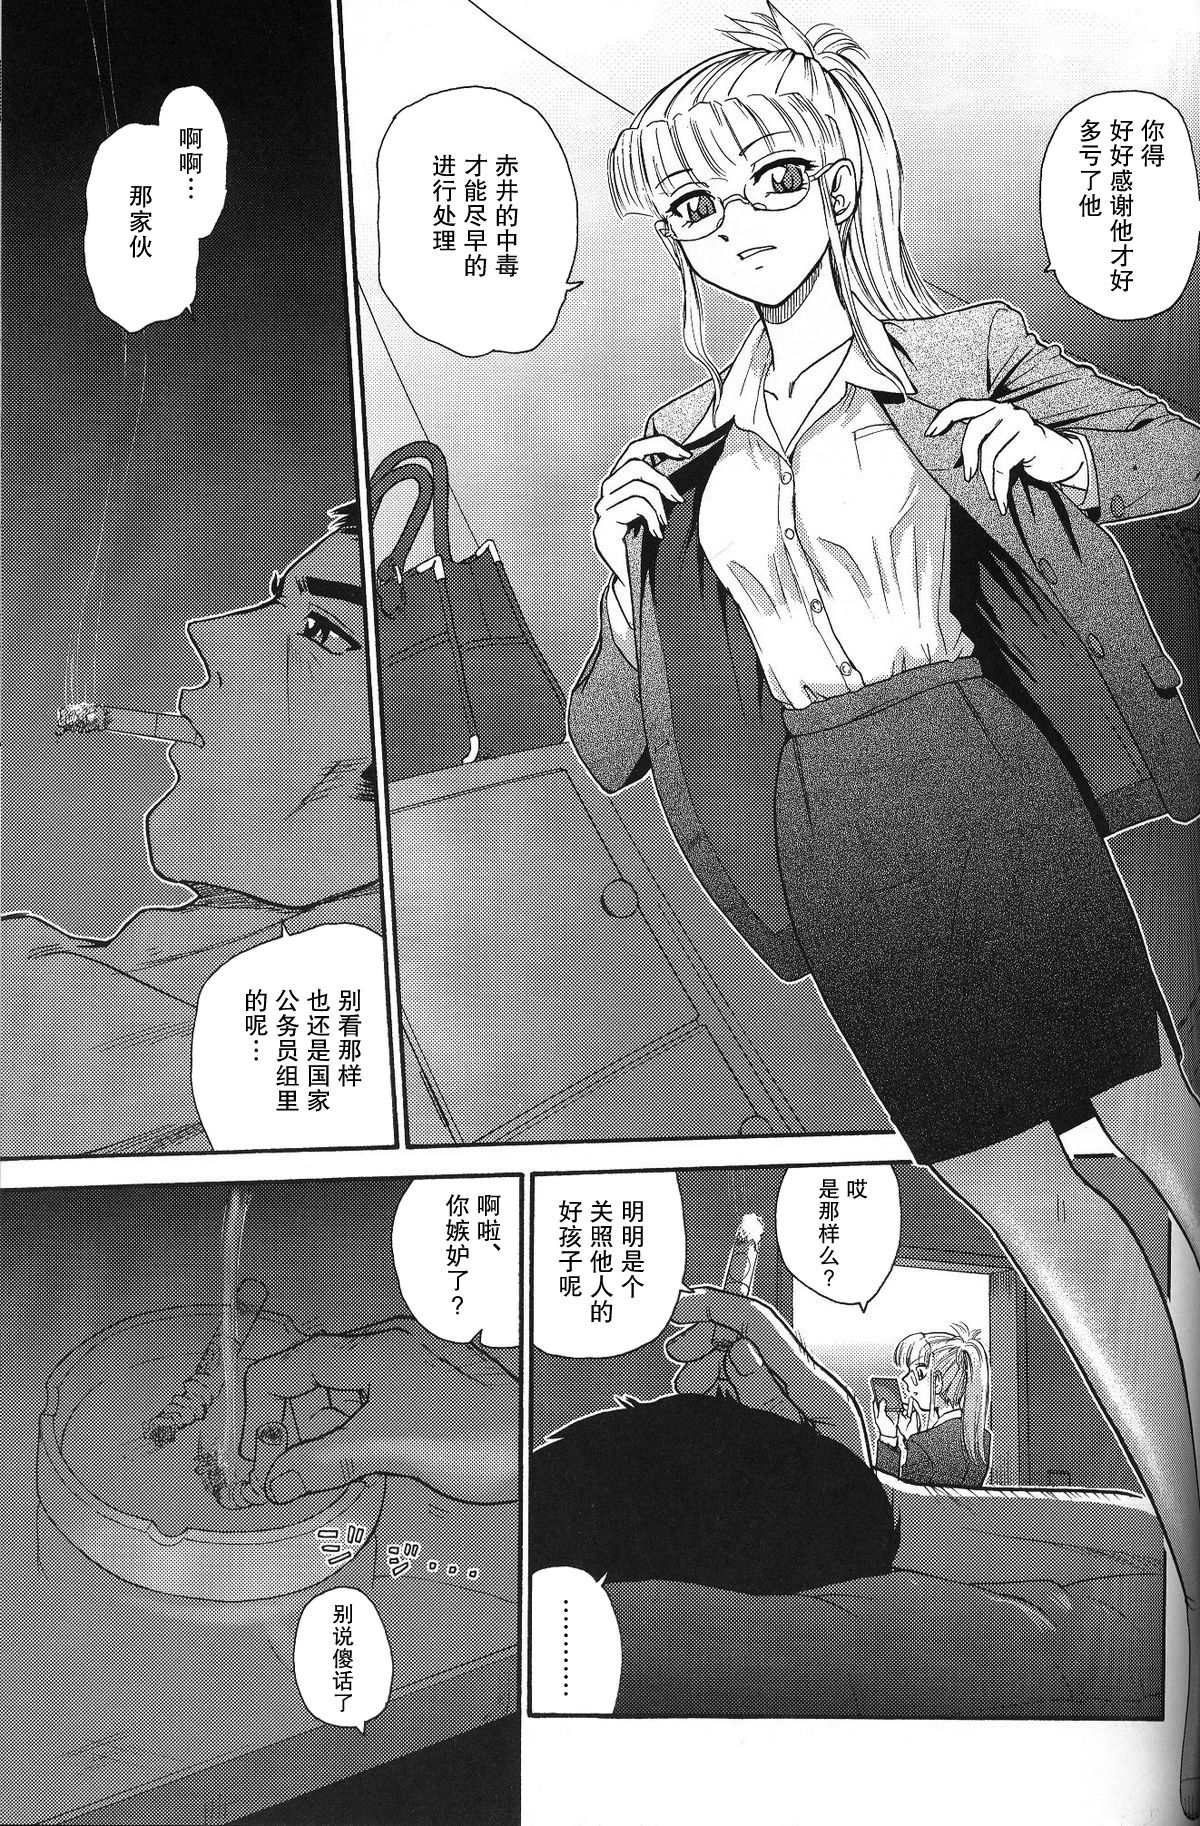 (C71) [Behind Moon (Q)] Dulce Report 8 | 达西报告 8 [Chinese] [哈尼喵汉化组] [Decensored] page 32 full